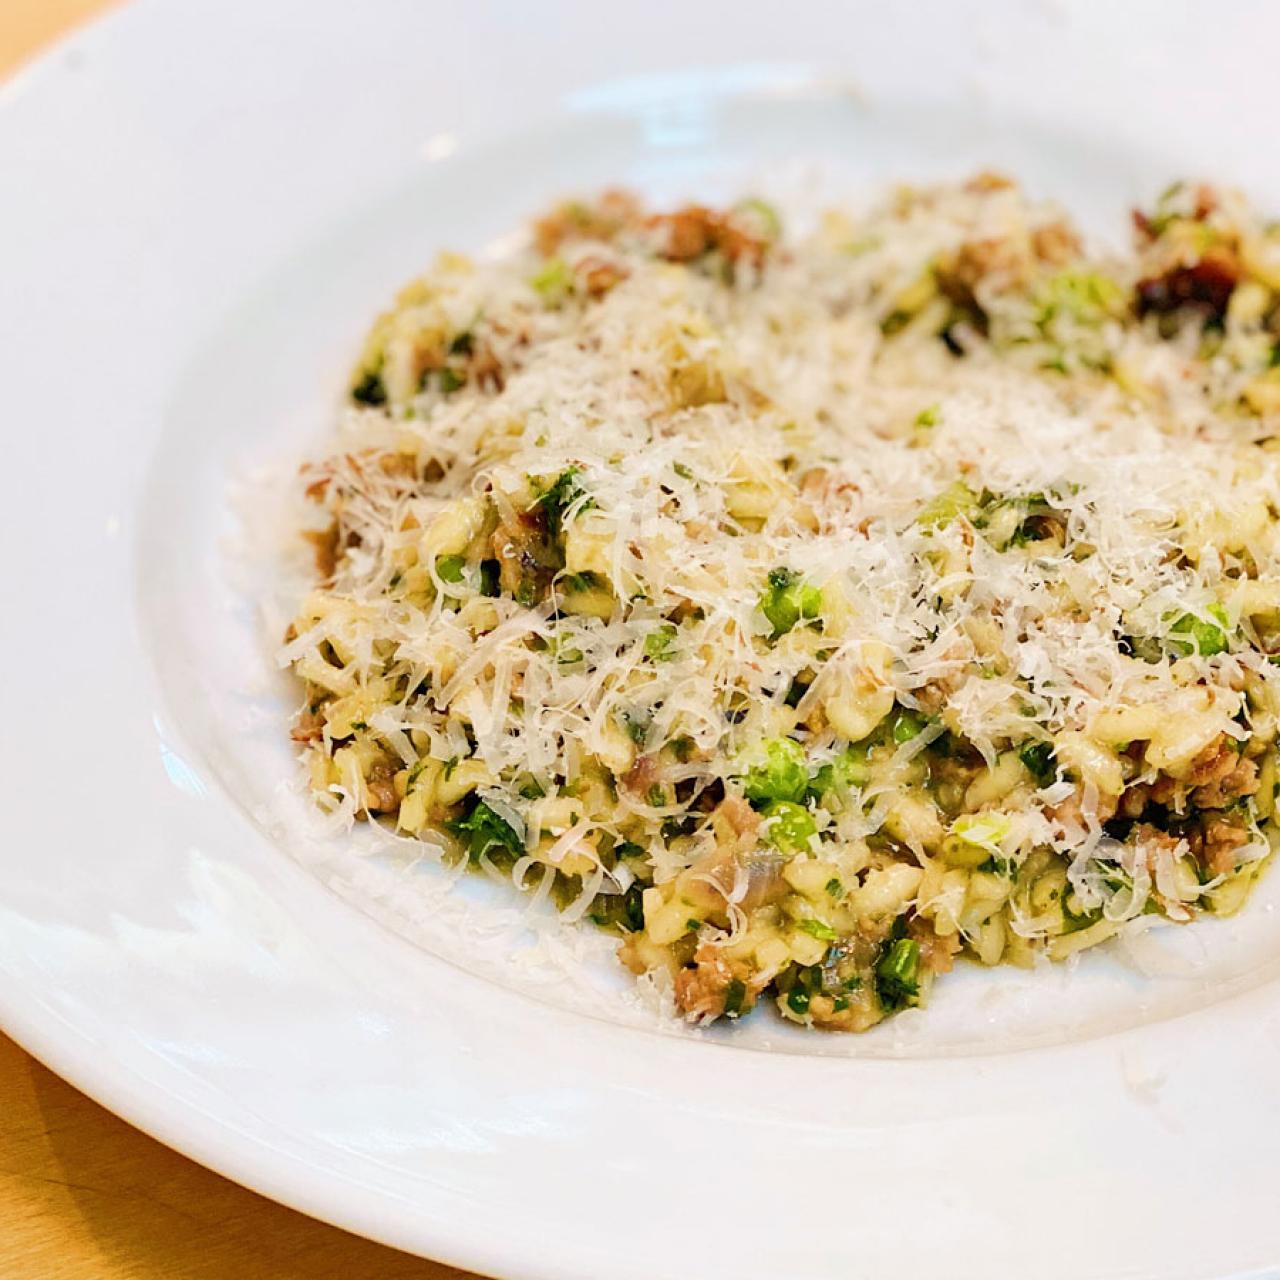 https://food.fnr.sndimg.com/content/dam/images/food/fullset/2020/04/30/Day-43_Risotto-with-Ground-Meat-and-Veg_s4x3.jpg.rend.hgtvcom.1280.1280.suffix/1588254755527.jpeg